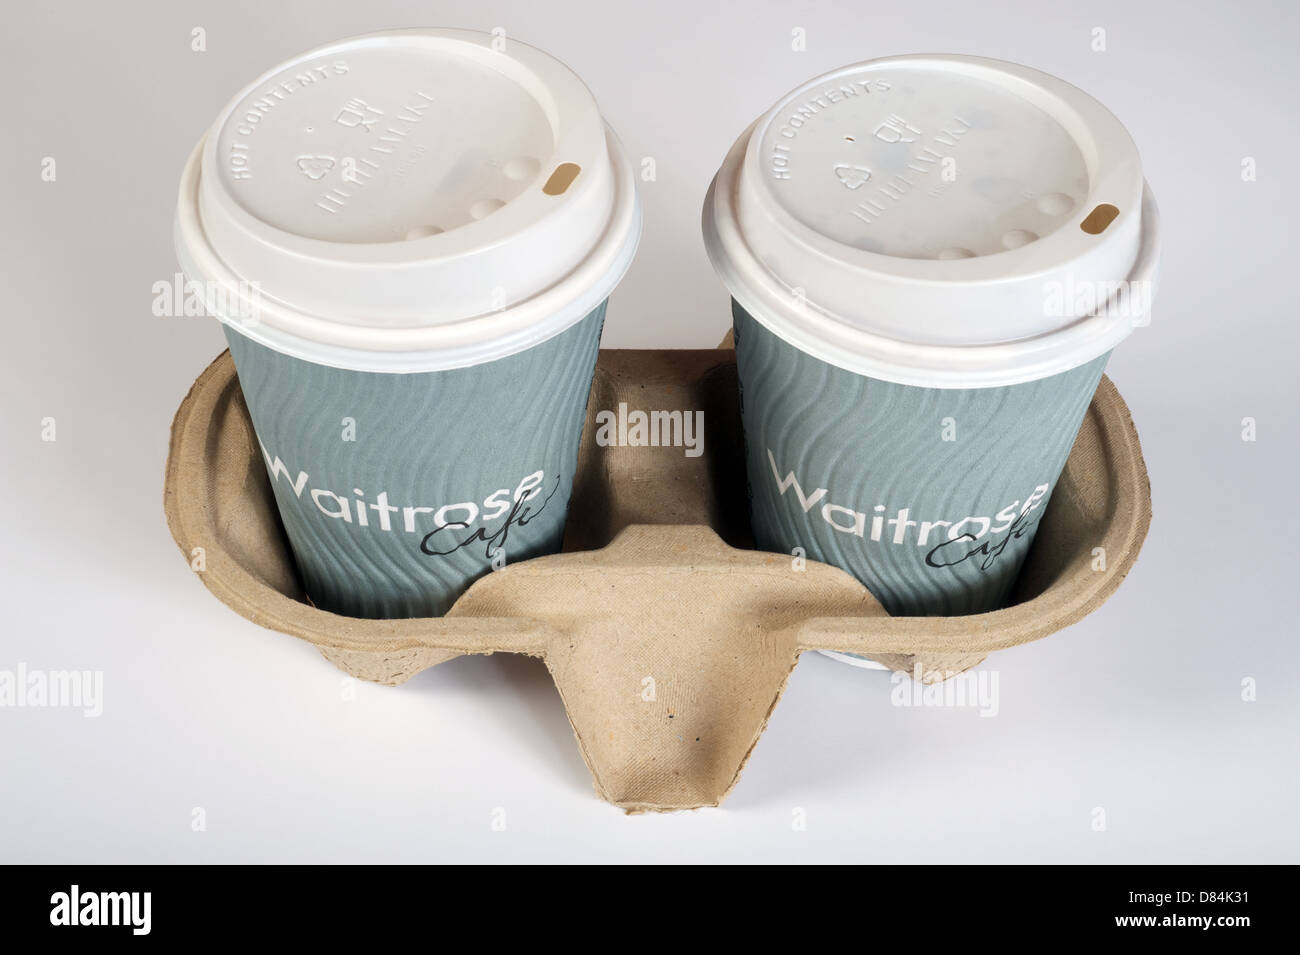 Waitrose cafe take-away coffee cups and carrier Stock Photo